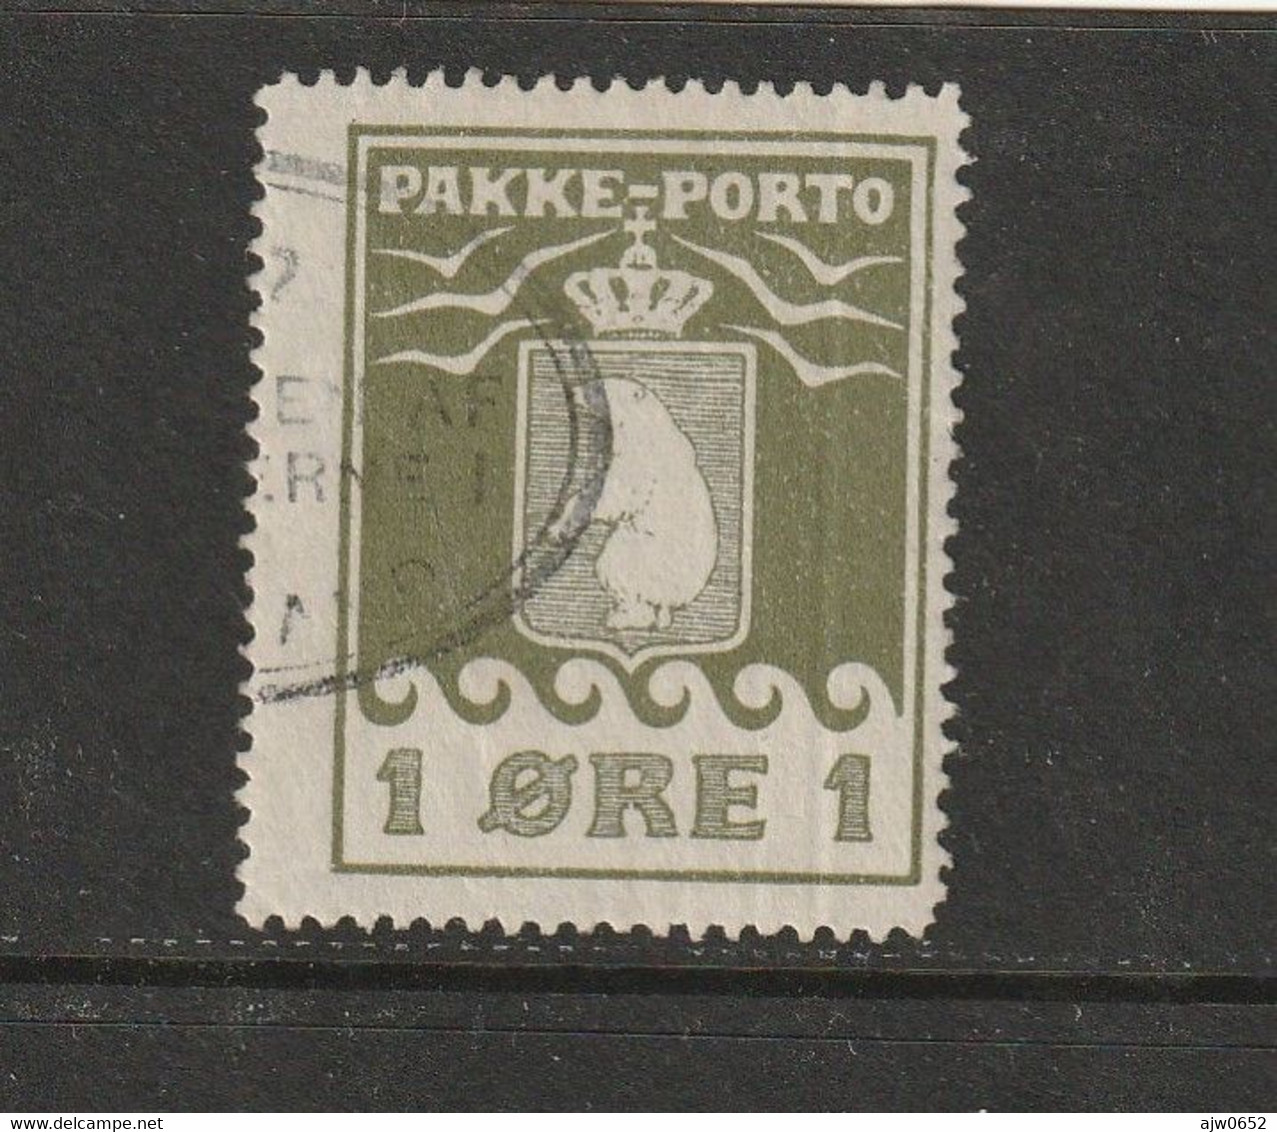 1924 1 ORE THIRD PRINT FINE USED - Parcel Post